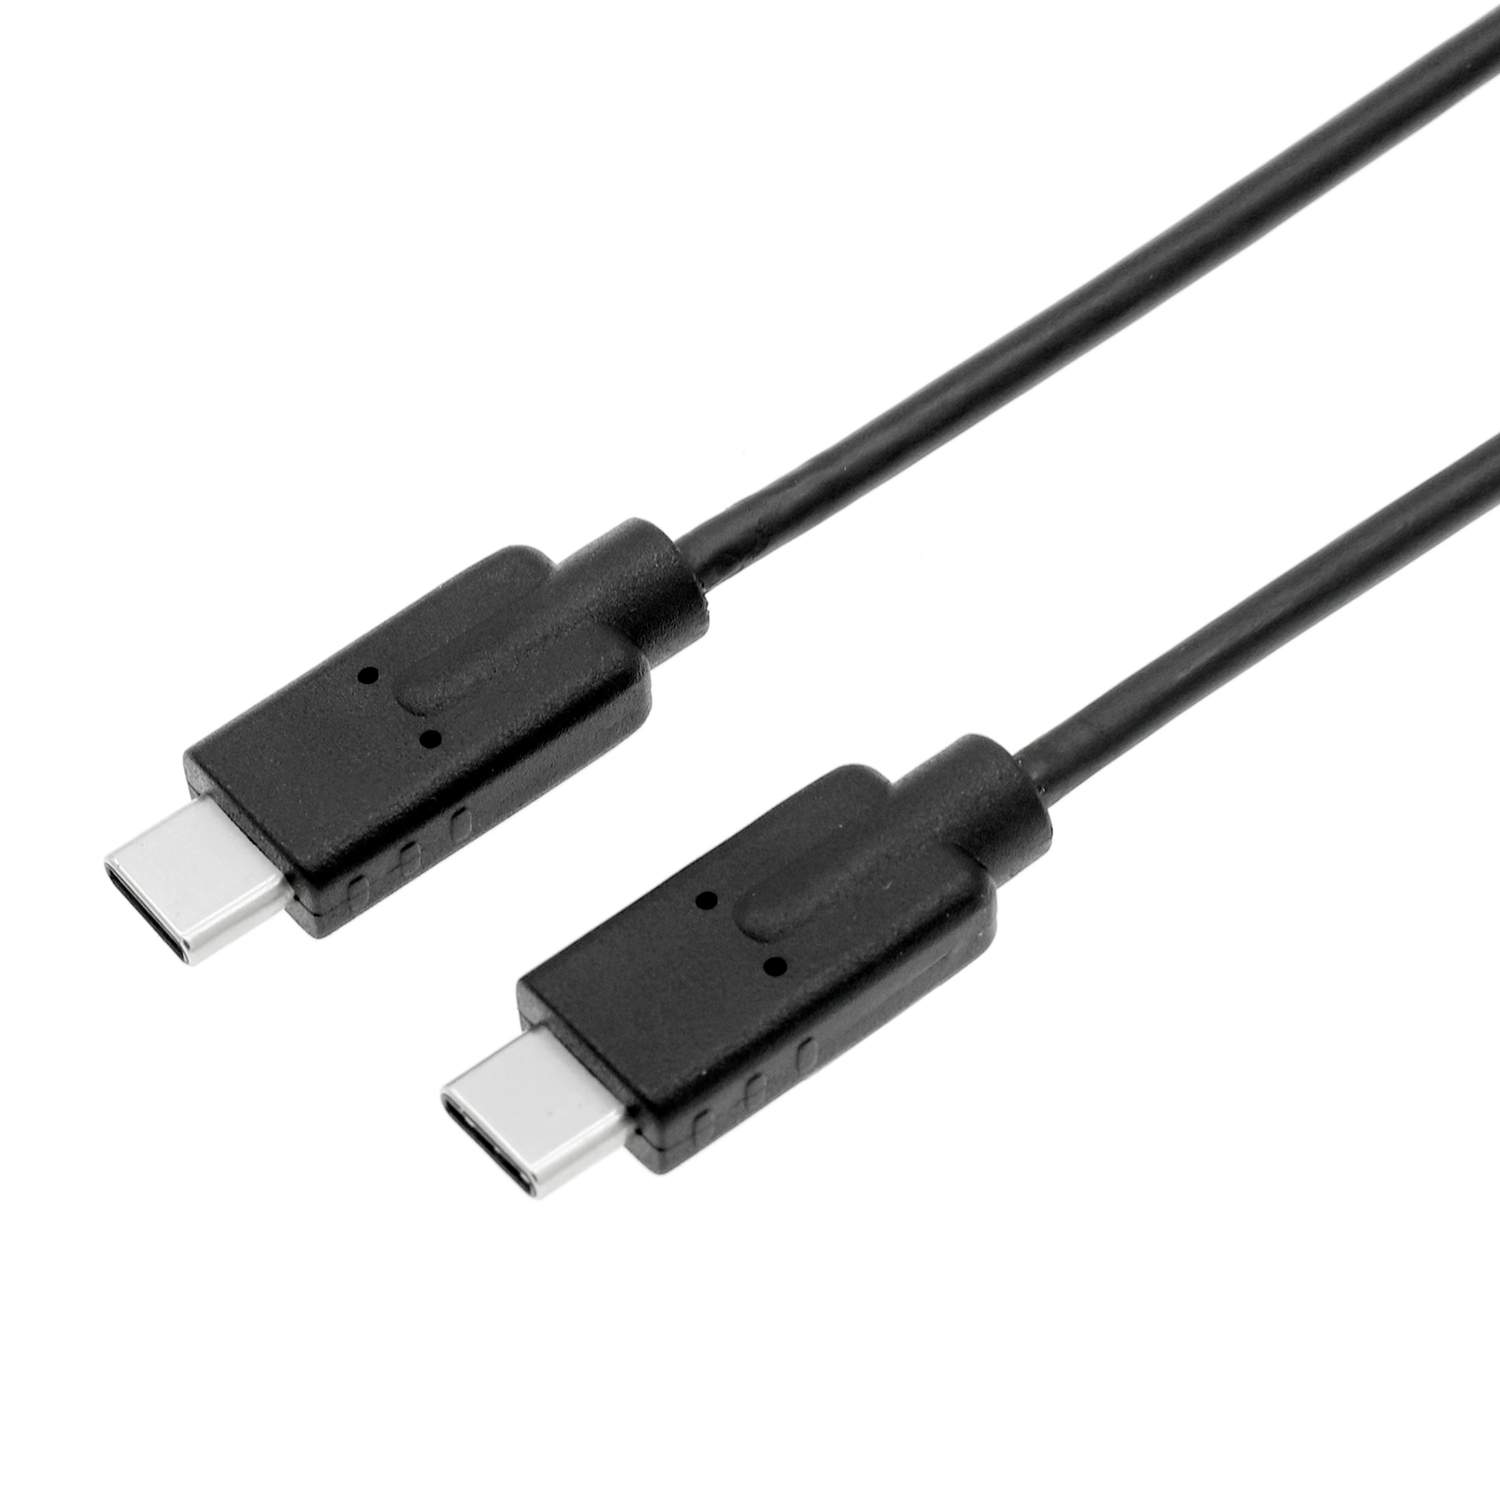 USB3.1 Gen 1 3A USB-C to USB-C Cable without E-Marker Chip 